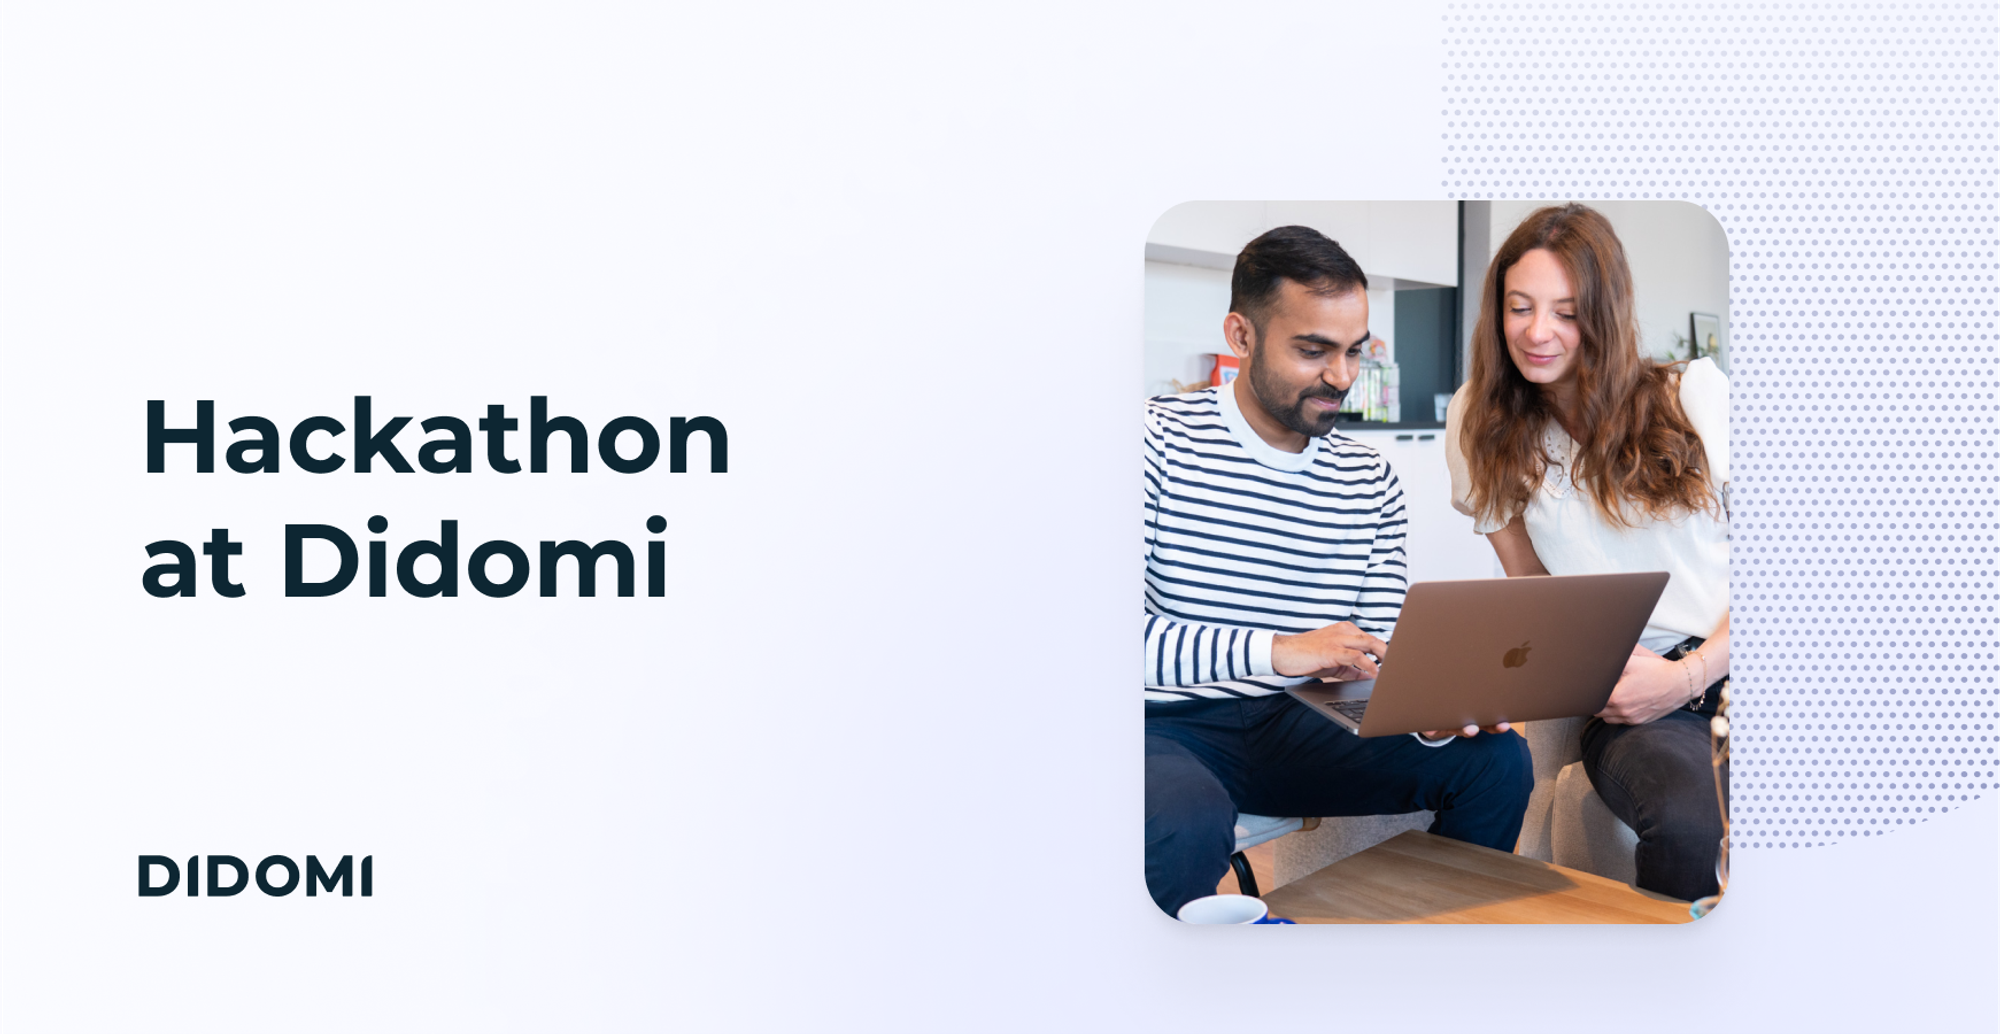 Supporting intrapreneurship and innovation with hackathons: how we do it at Didomi